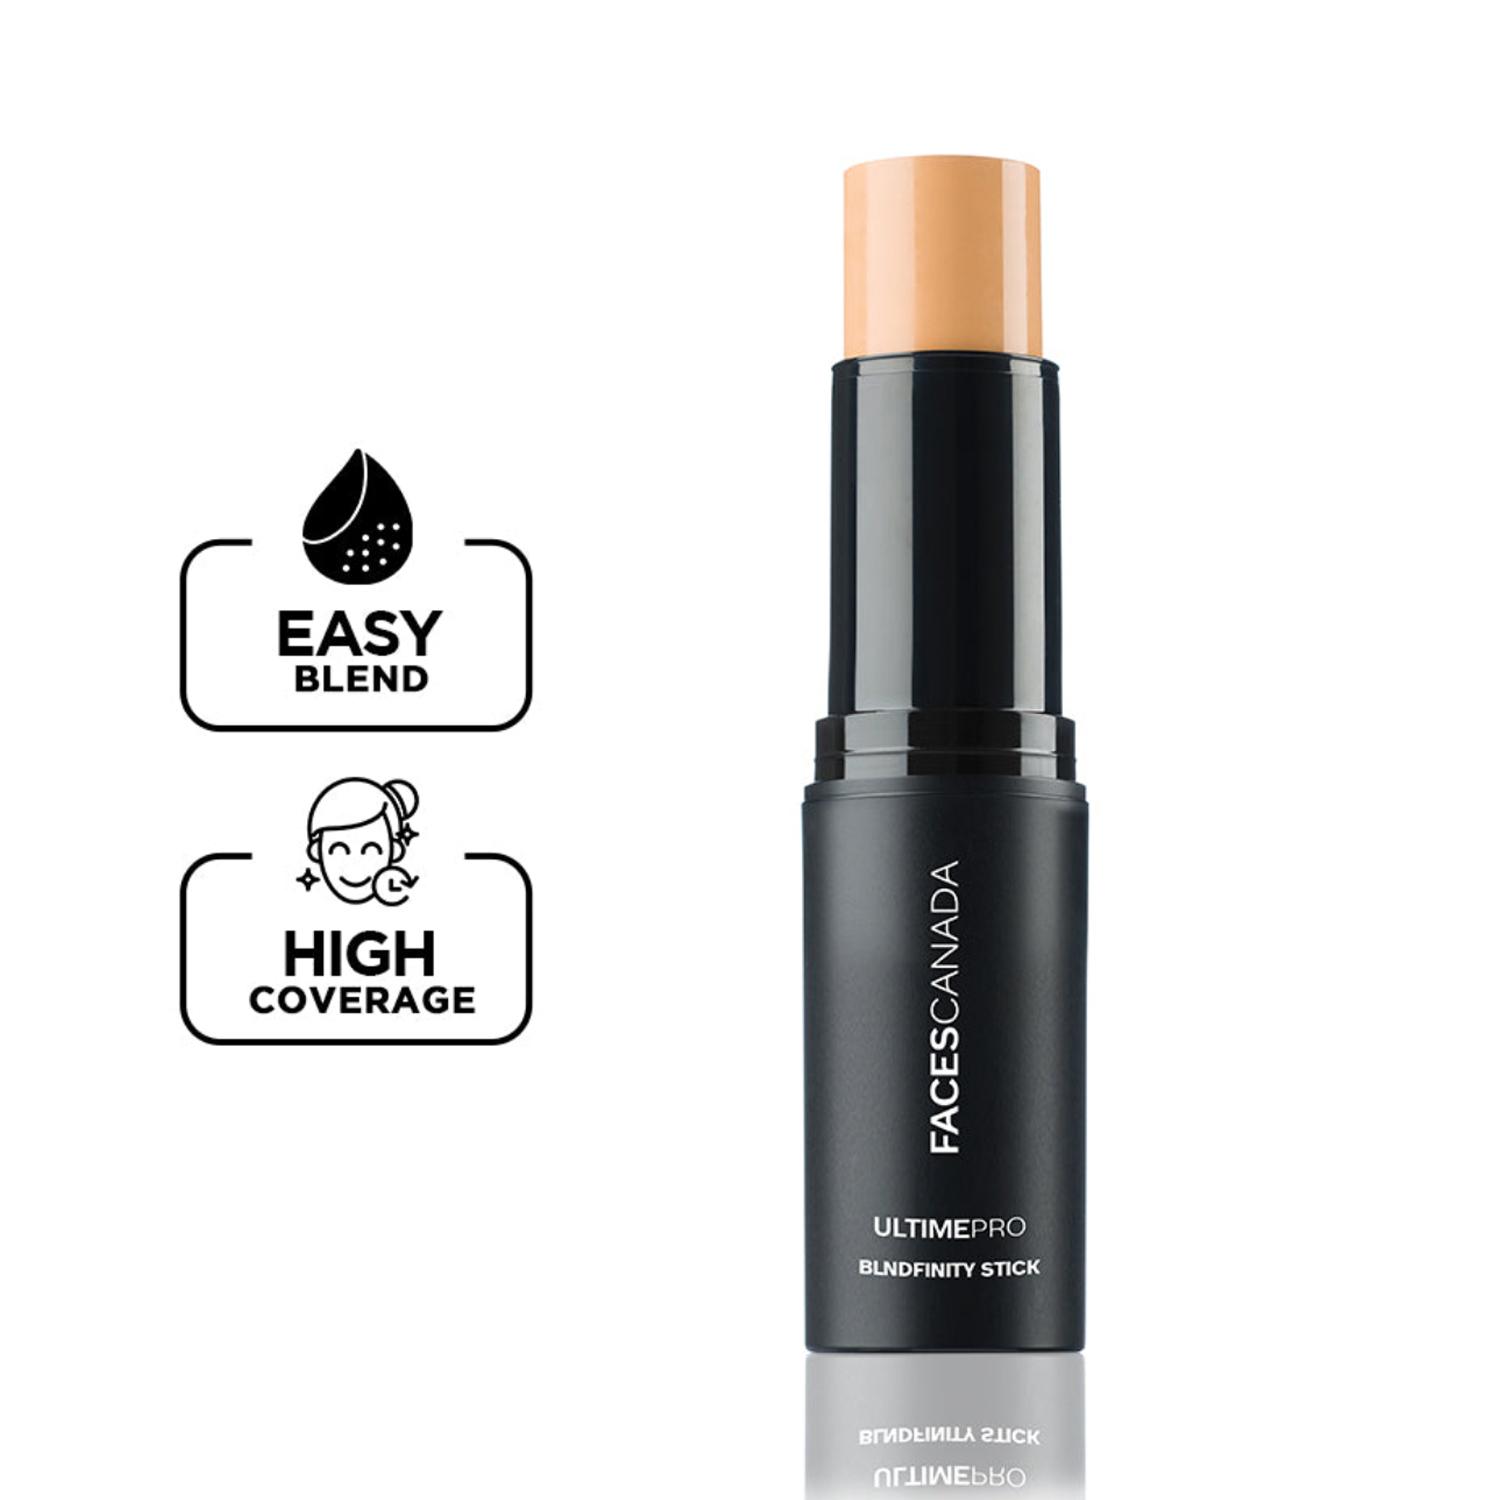 Faces Canada | Faces Canada Ultime Pro BlendFinity Stick Foundation - Beige, Creamy Texture (10 g)